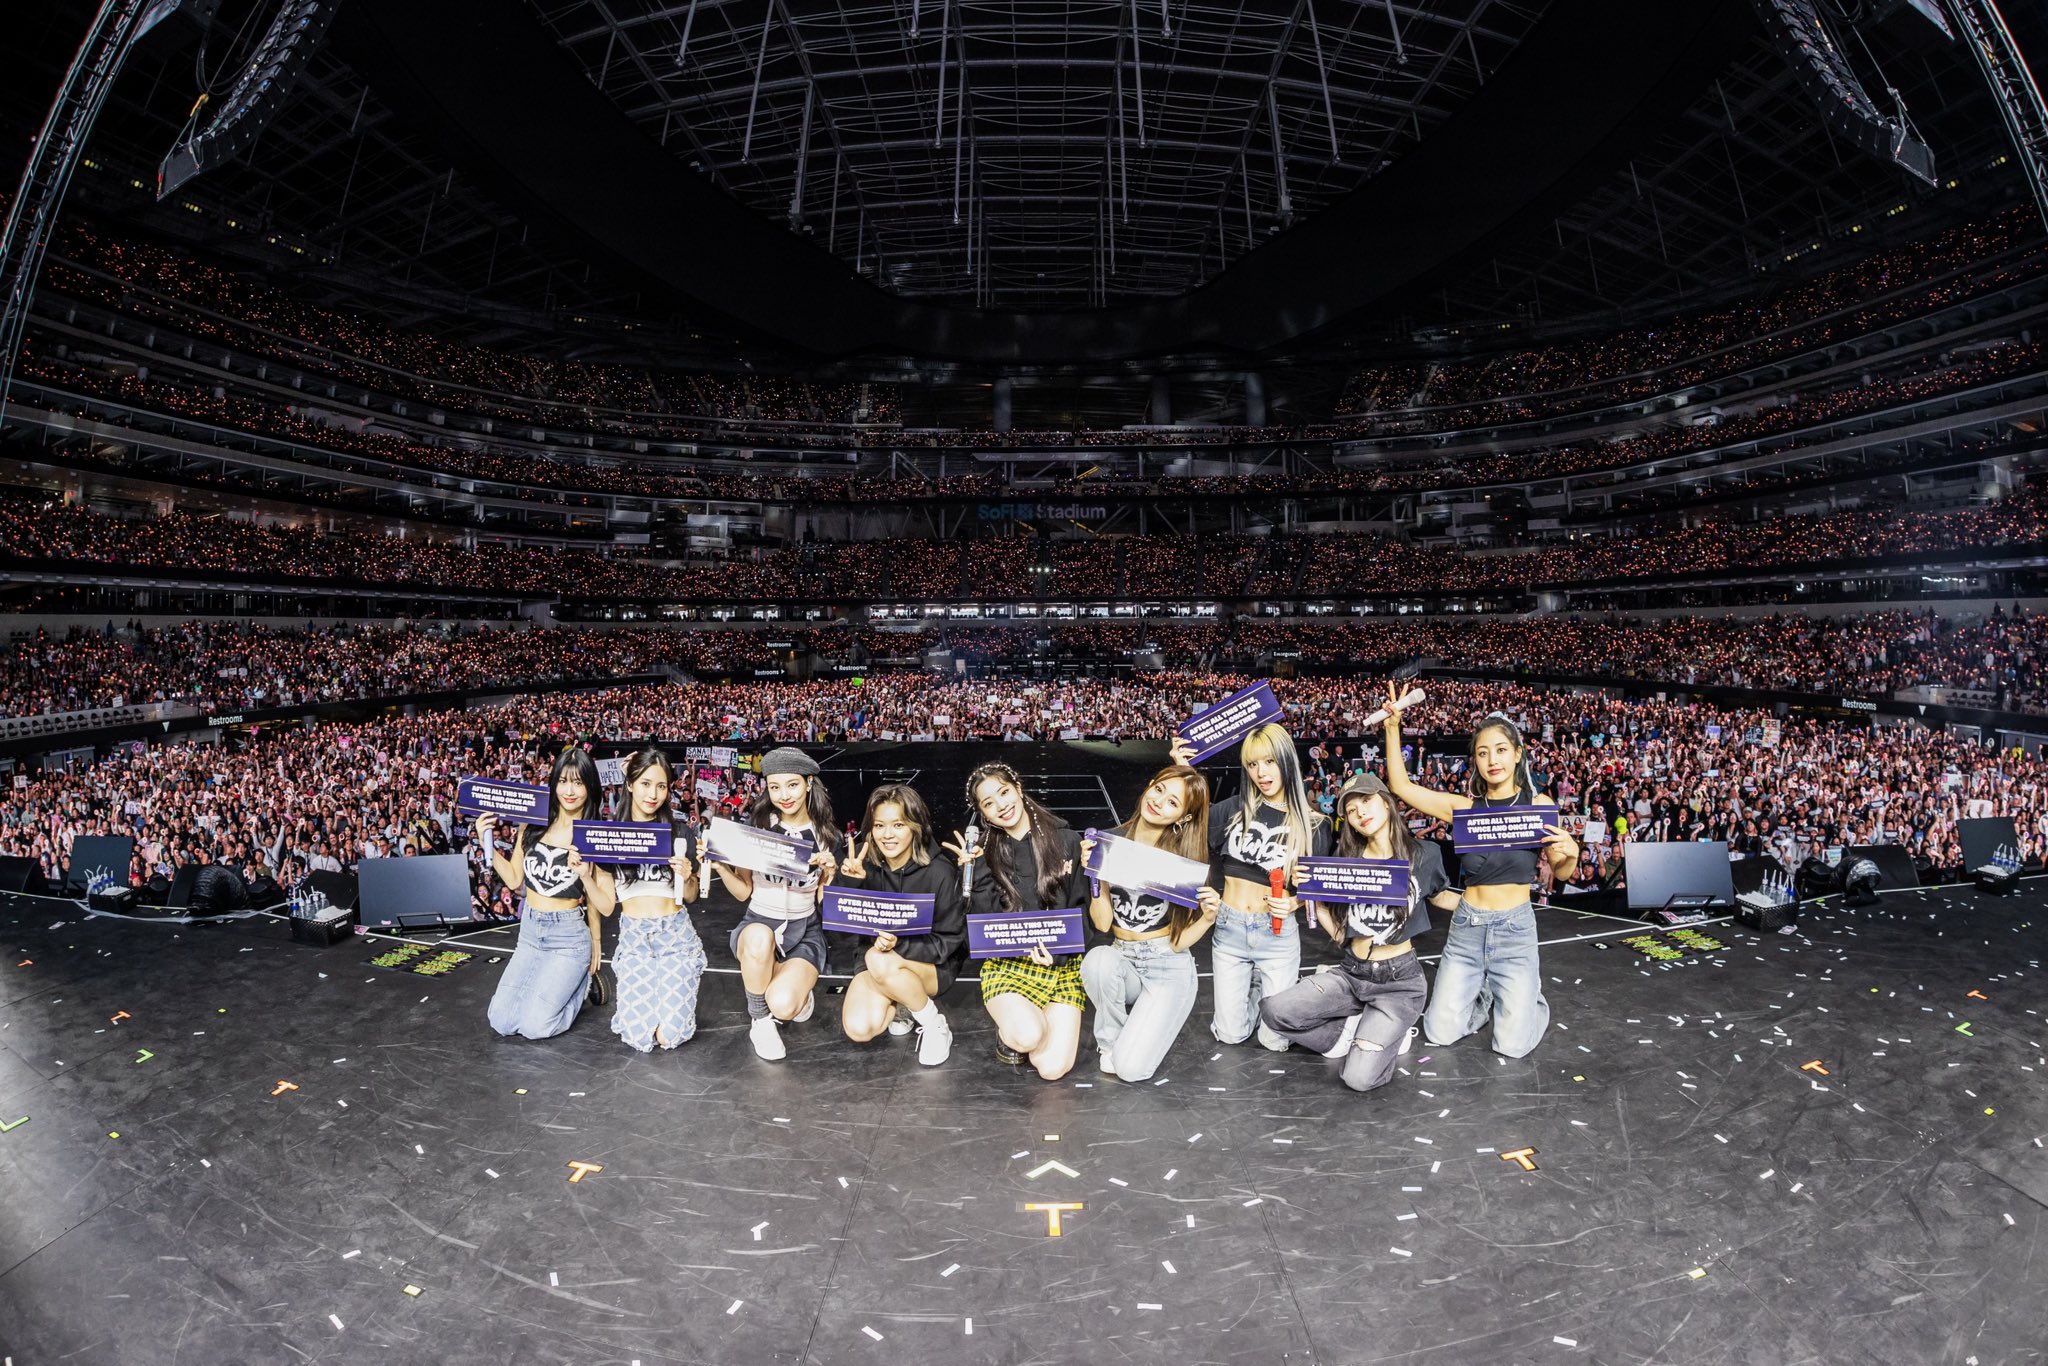 TWICE, Sold Out in Brazil First in K-Pop Girl Group History